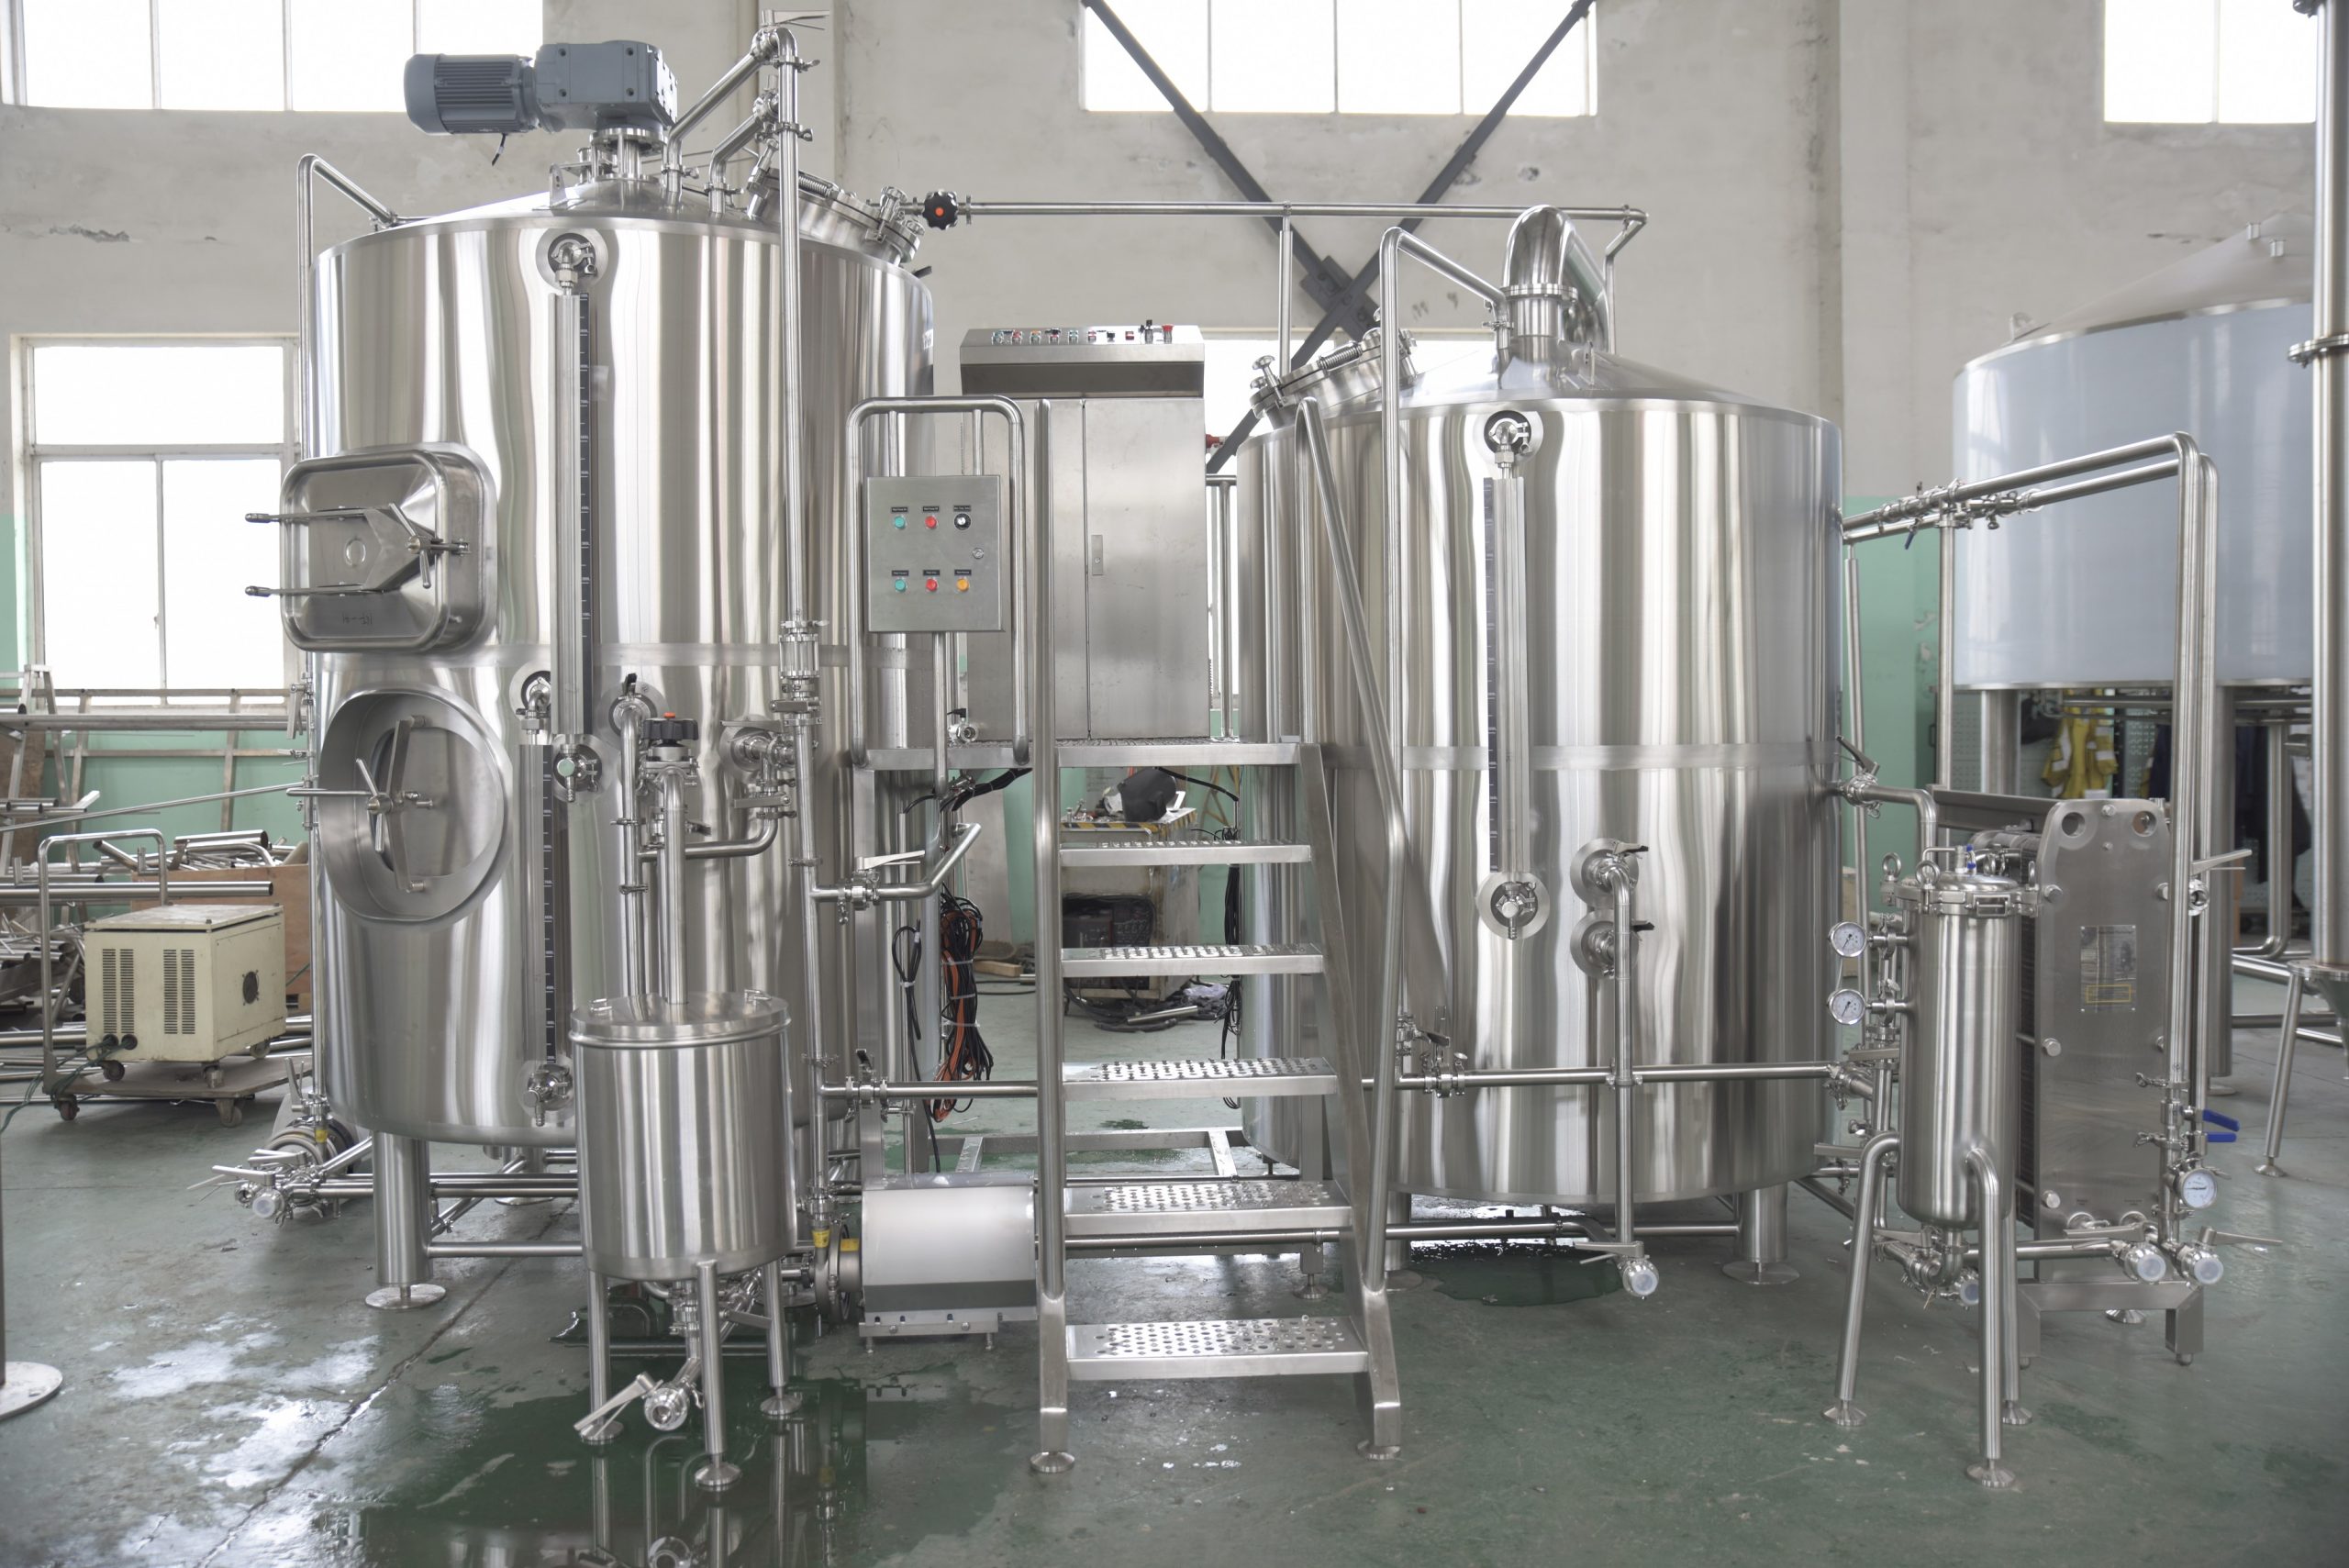 What Is The Fastest Heating Method For Brewhouse Equipment ?